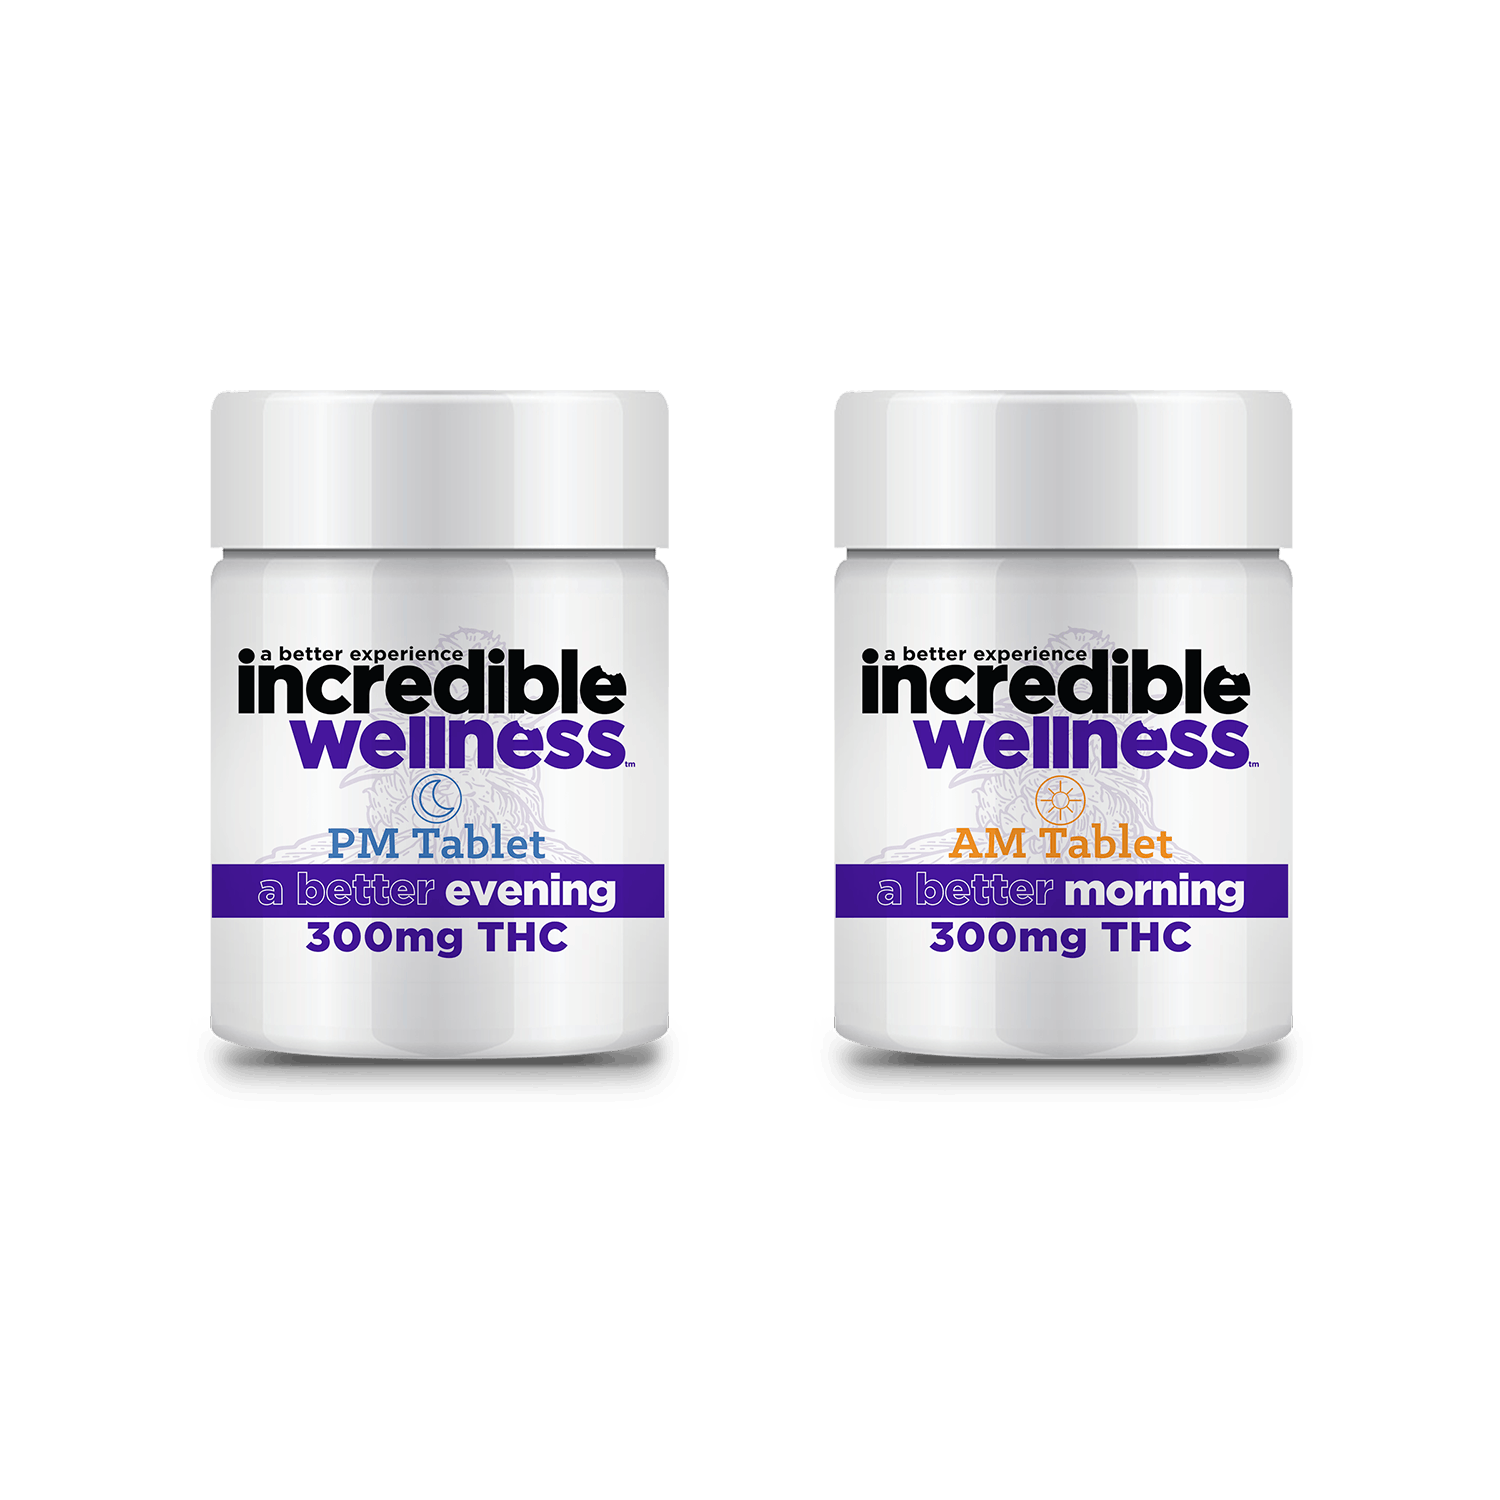 edible-incredible-am-a-pm-tablets